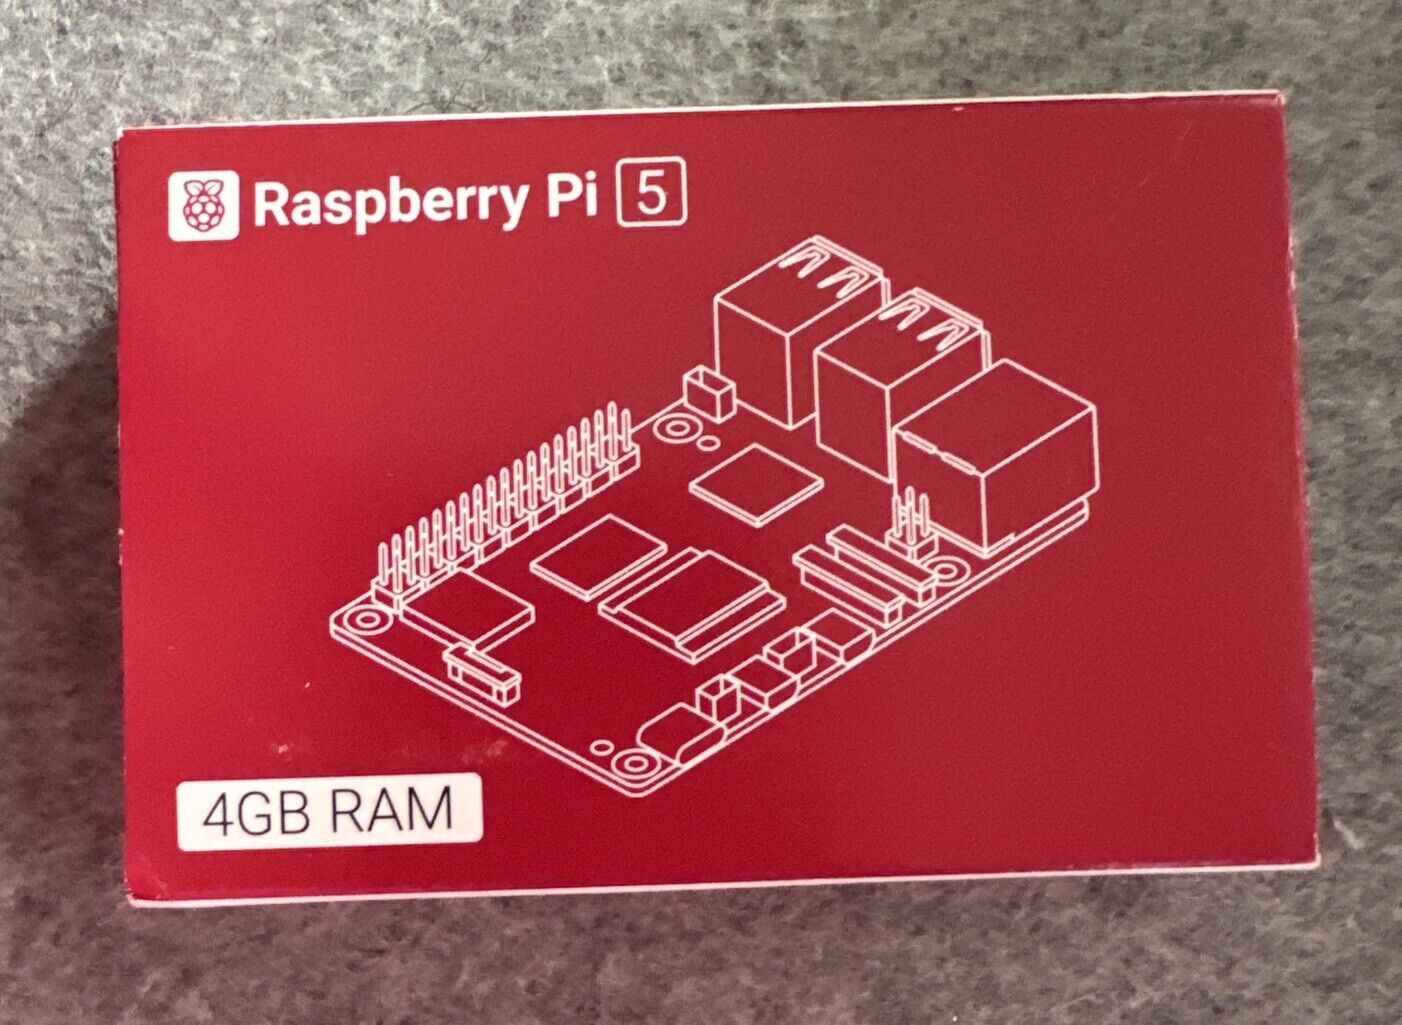 Raspberry Pi 5 4GB RAM BRAND NEW SEALED - IN HAND SHIPS NOW